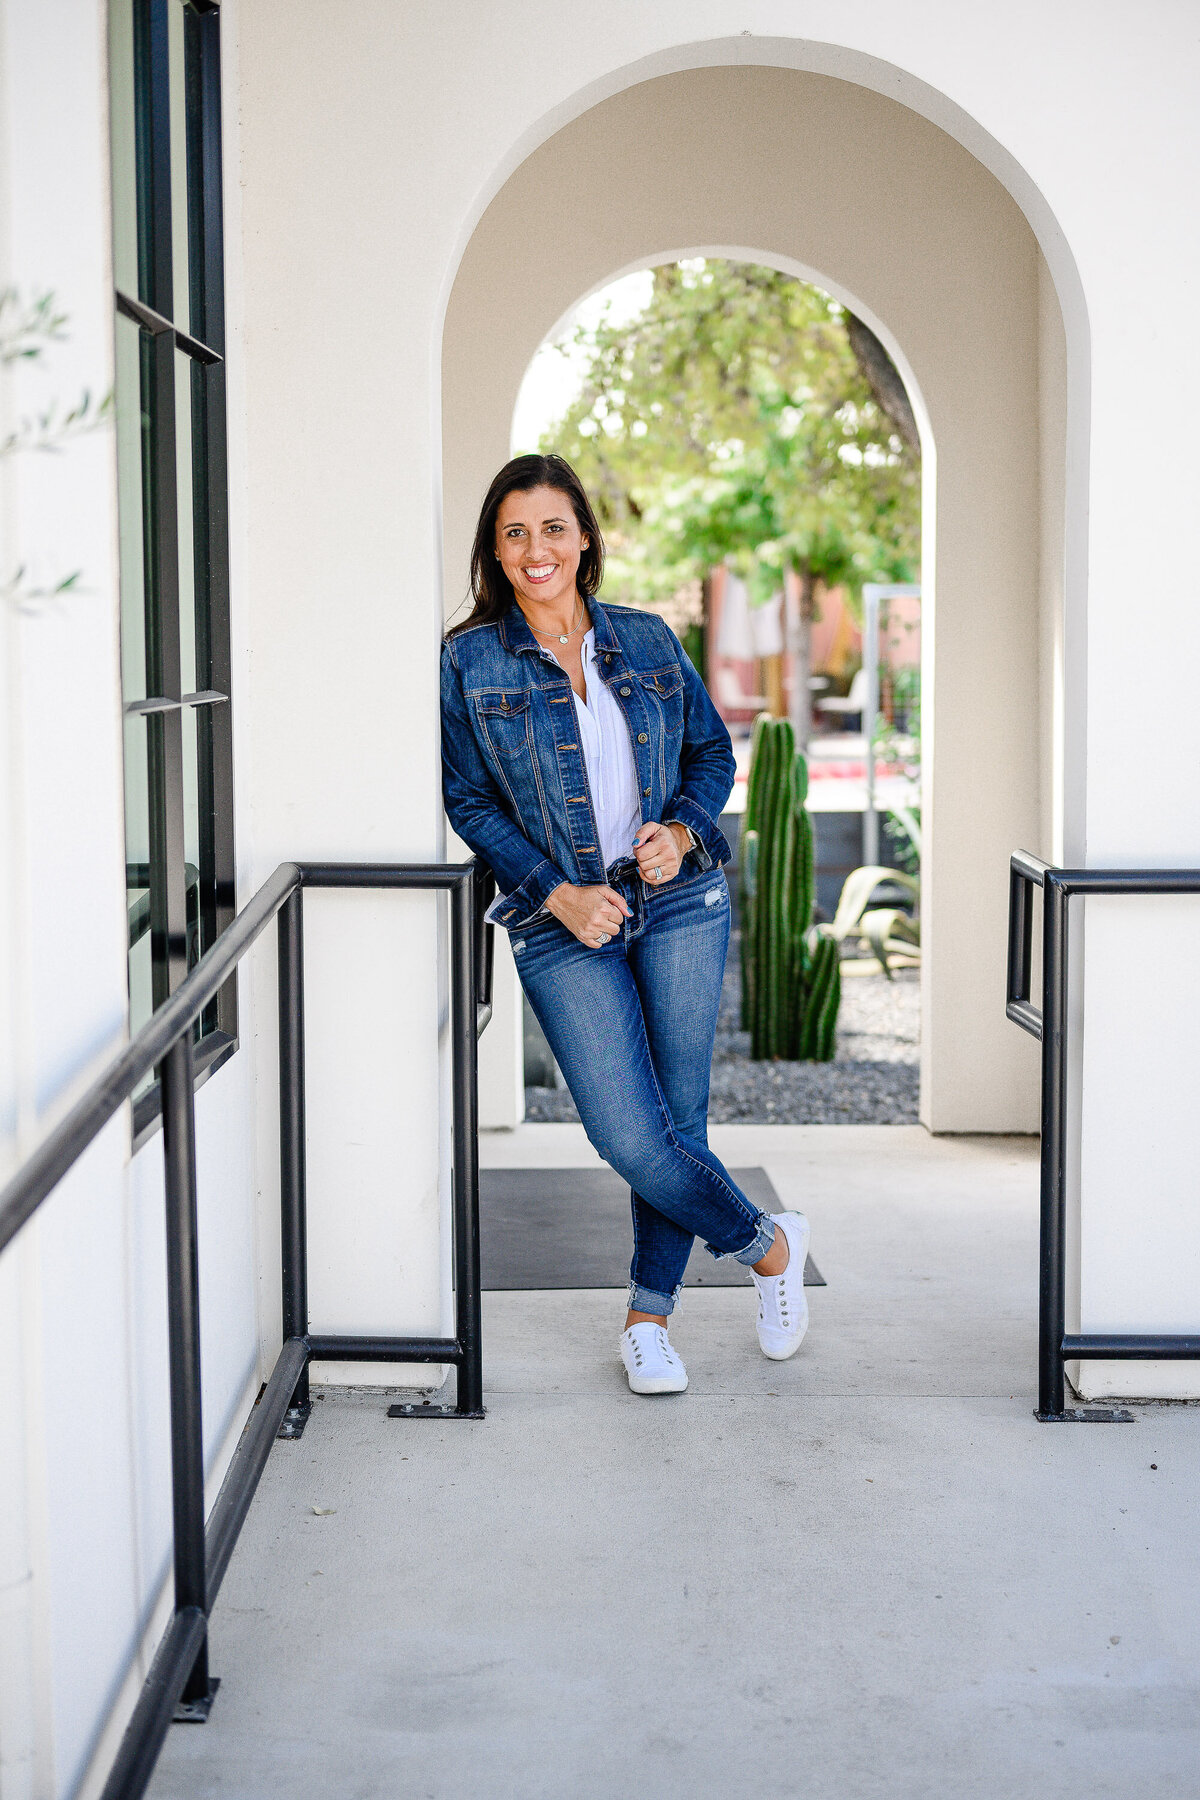 denver commercial photographer captures outdoor brand photography with woman outside on a white spansih styles building wearing denim